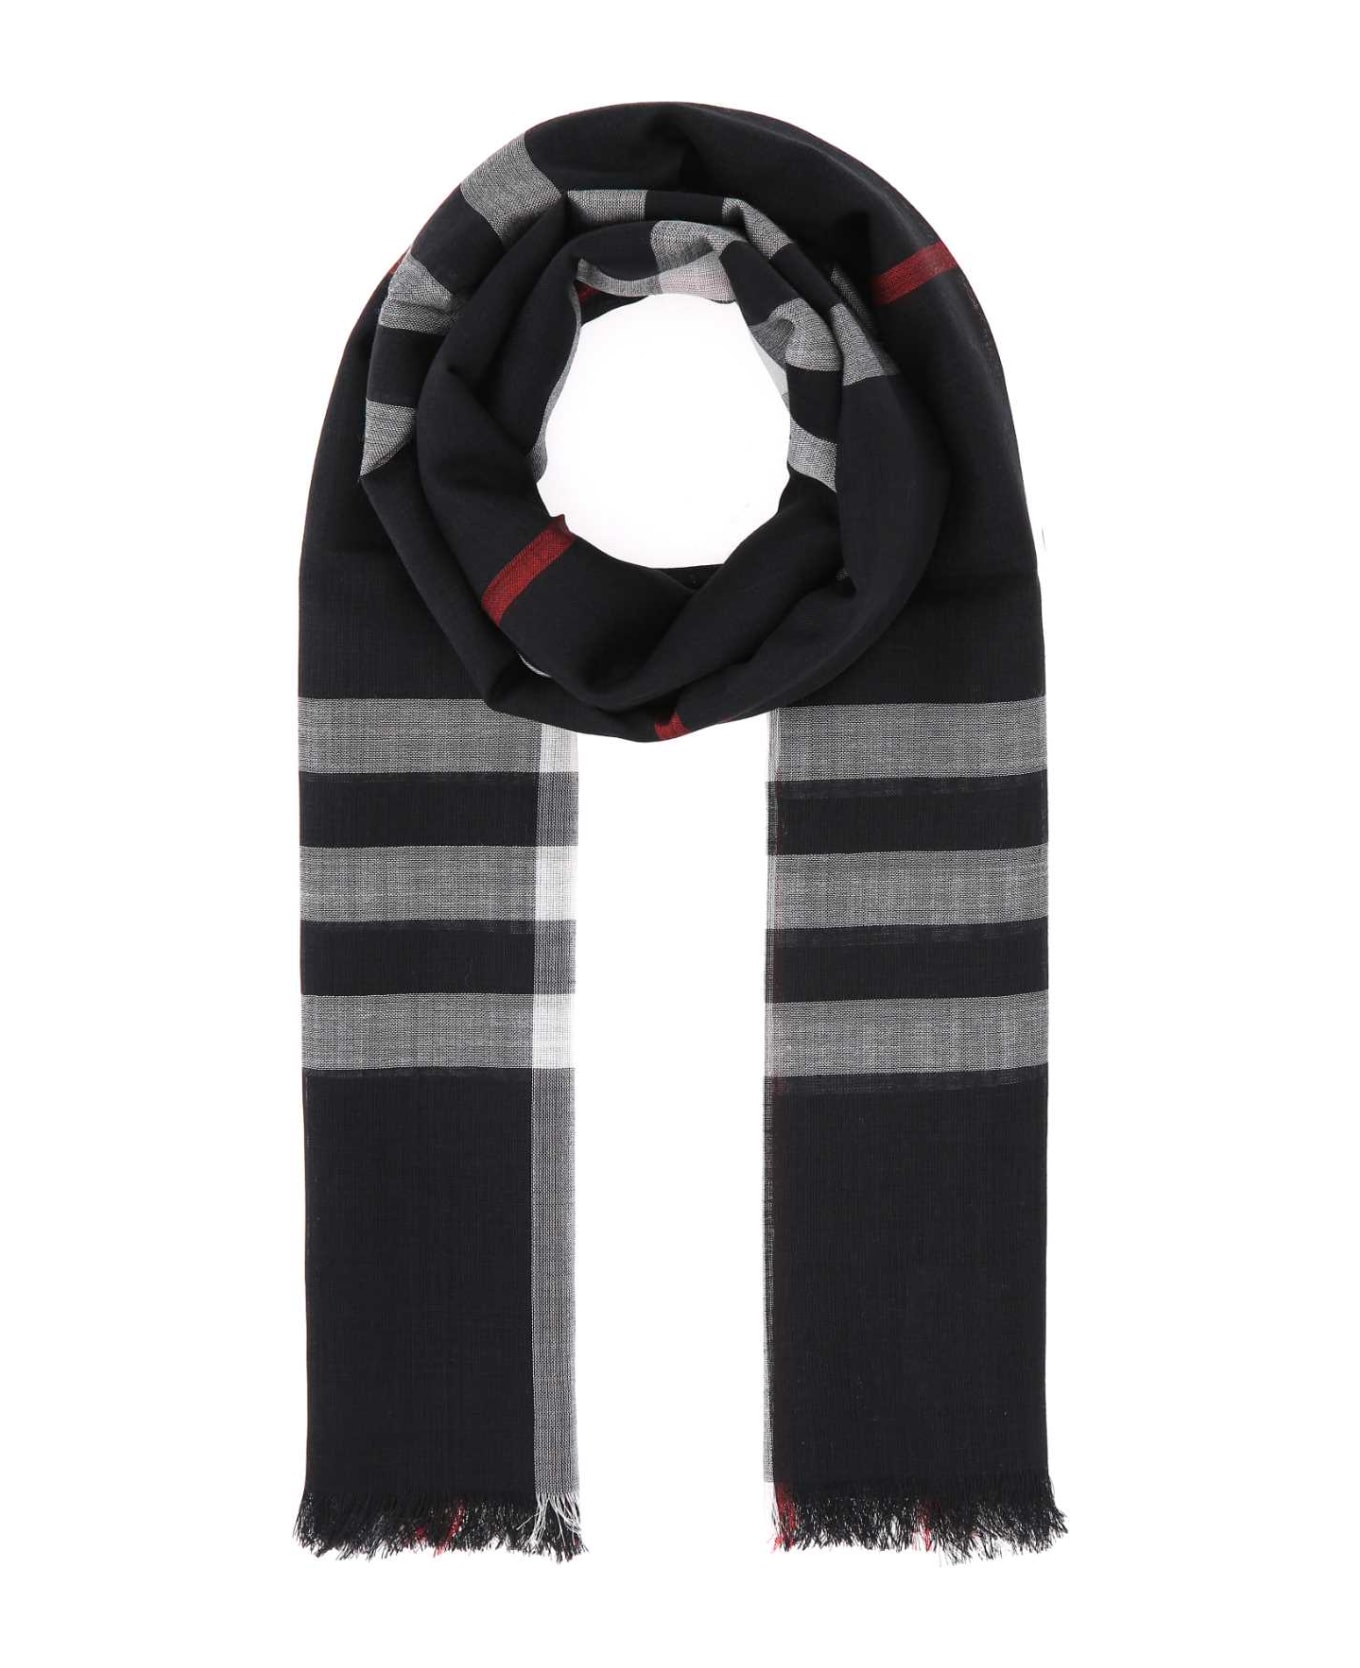 Burberry Embroidered Wool Blend Scarf - NAVY スカーフ